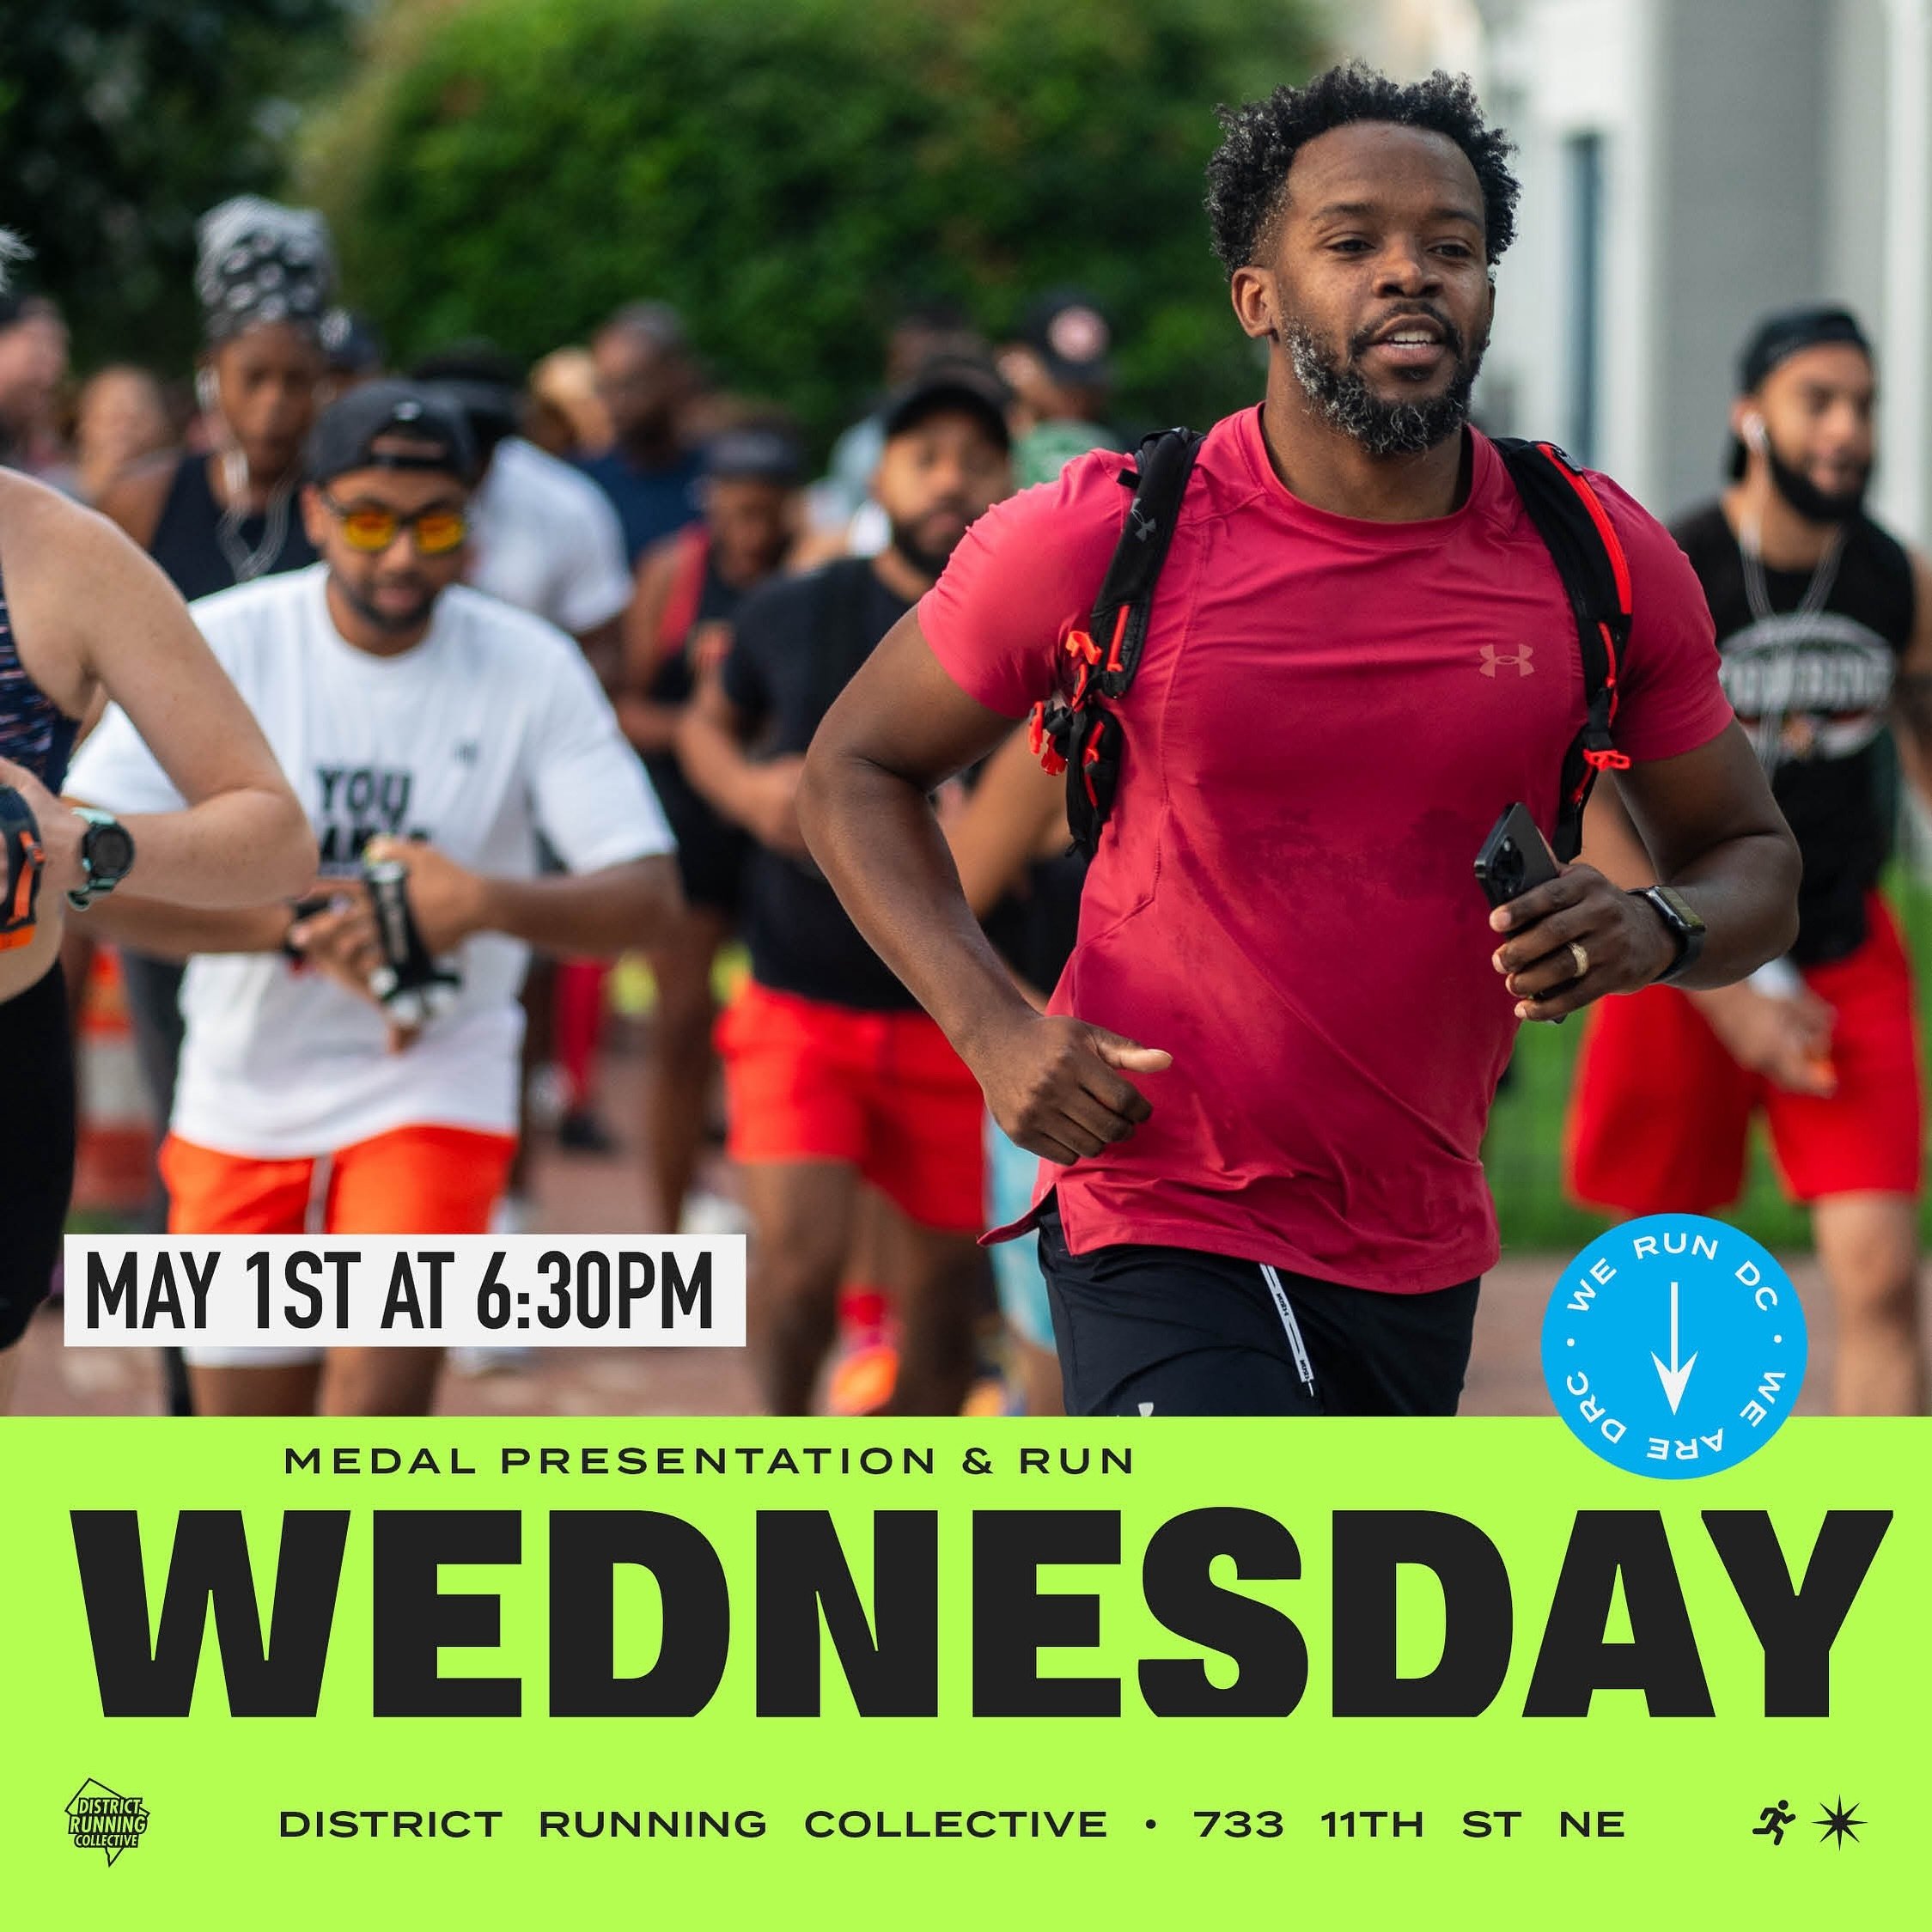 RSVPs are open for this Wednesdays run. We will have a special medal presentation to for the finishers from big races over the last few weeks. Spring is officially in DC and the weather is amazing. See you soon!
RSVP link in the bio.